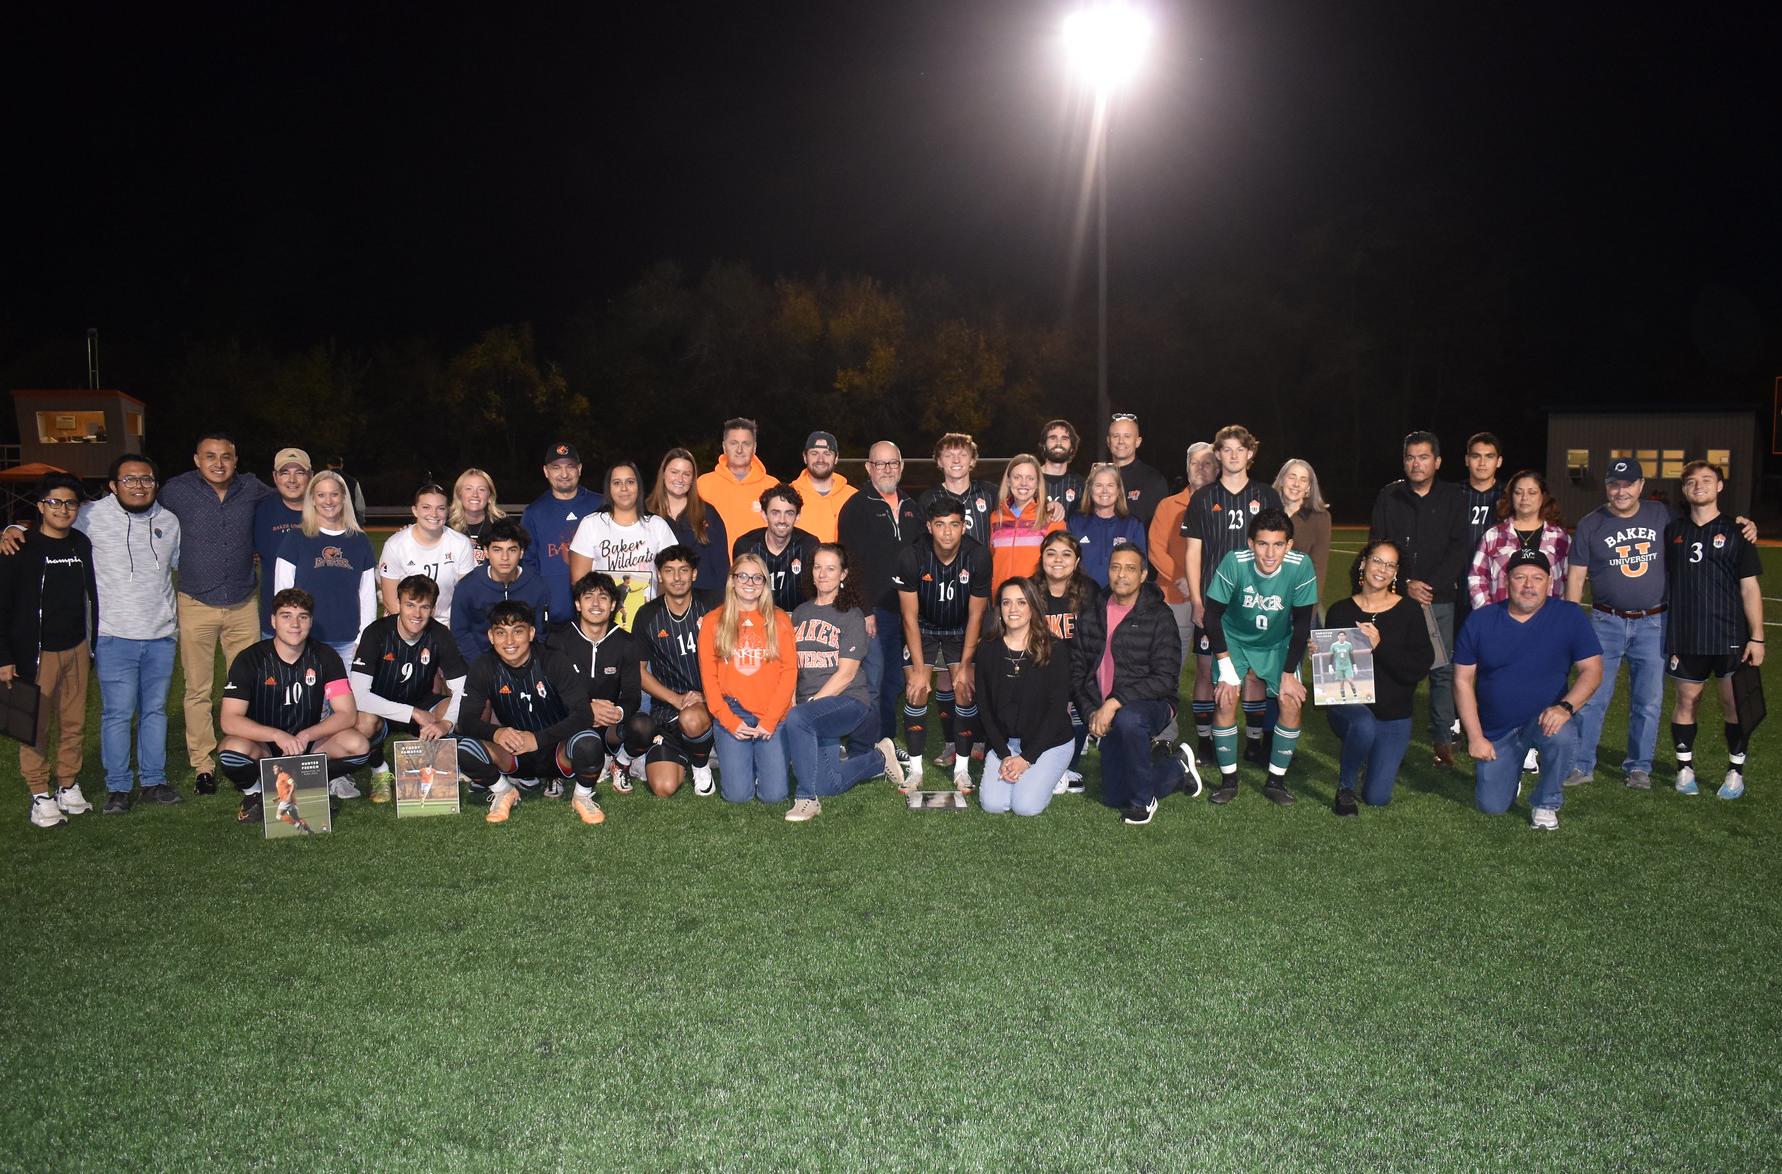 Men’s Soccer Earns Senior Night Victory with 3-2 Win over Yellowjackets